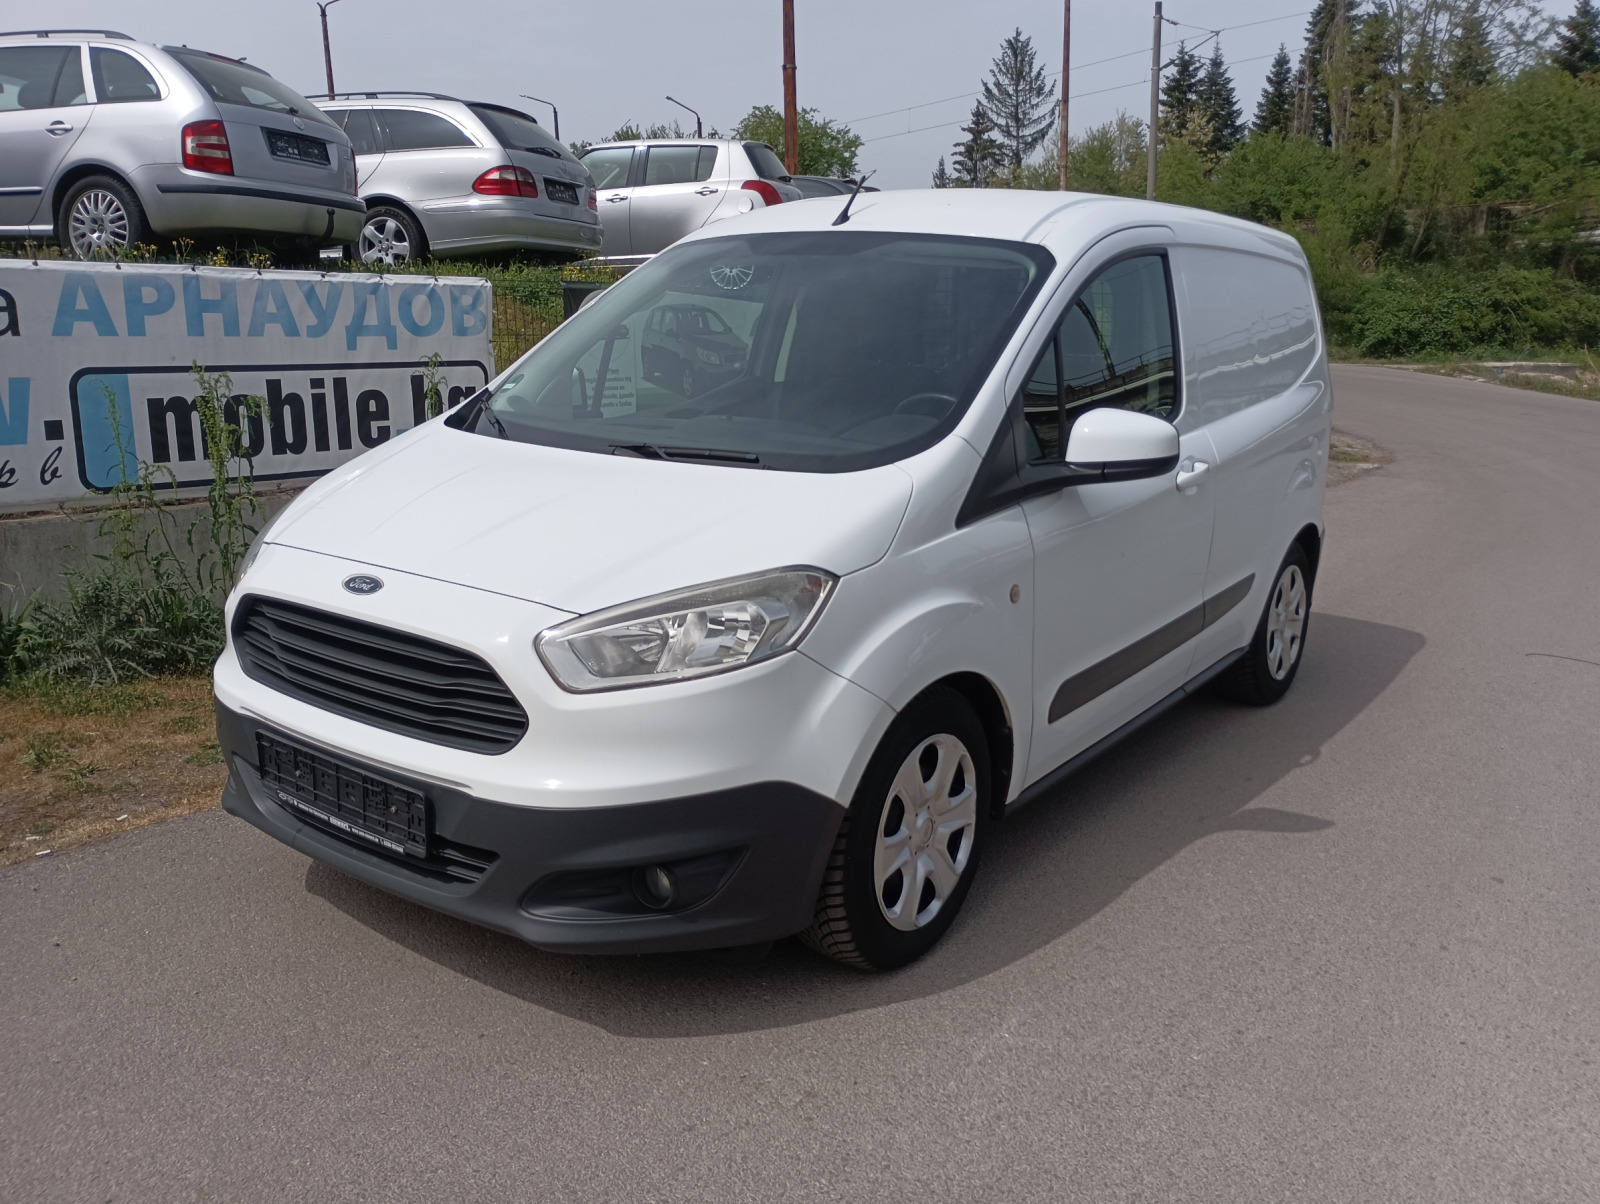 Ford Courier Transit - [1] 